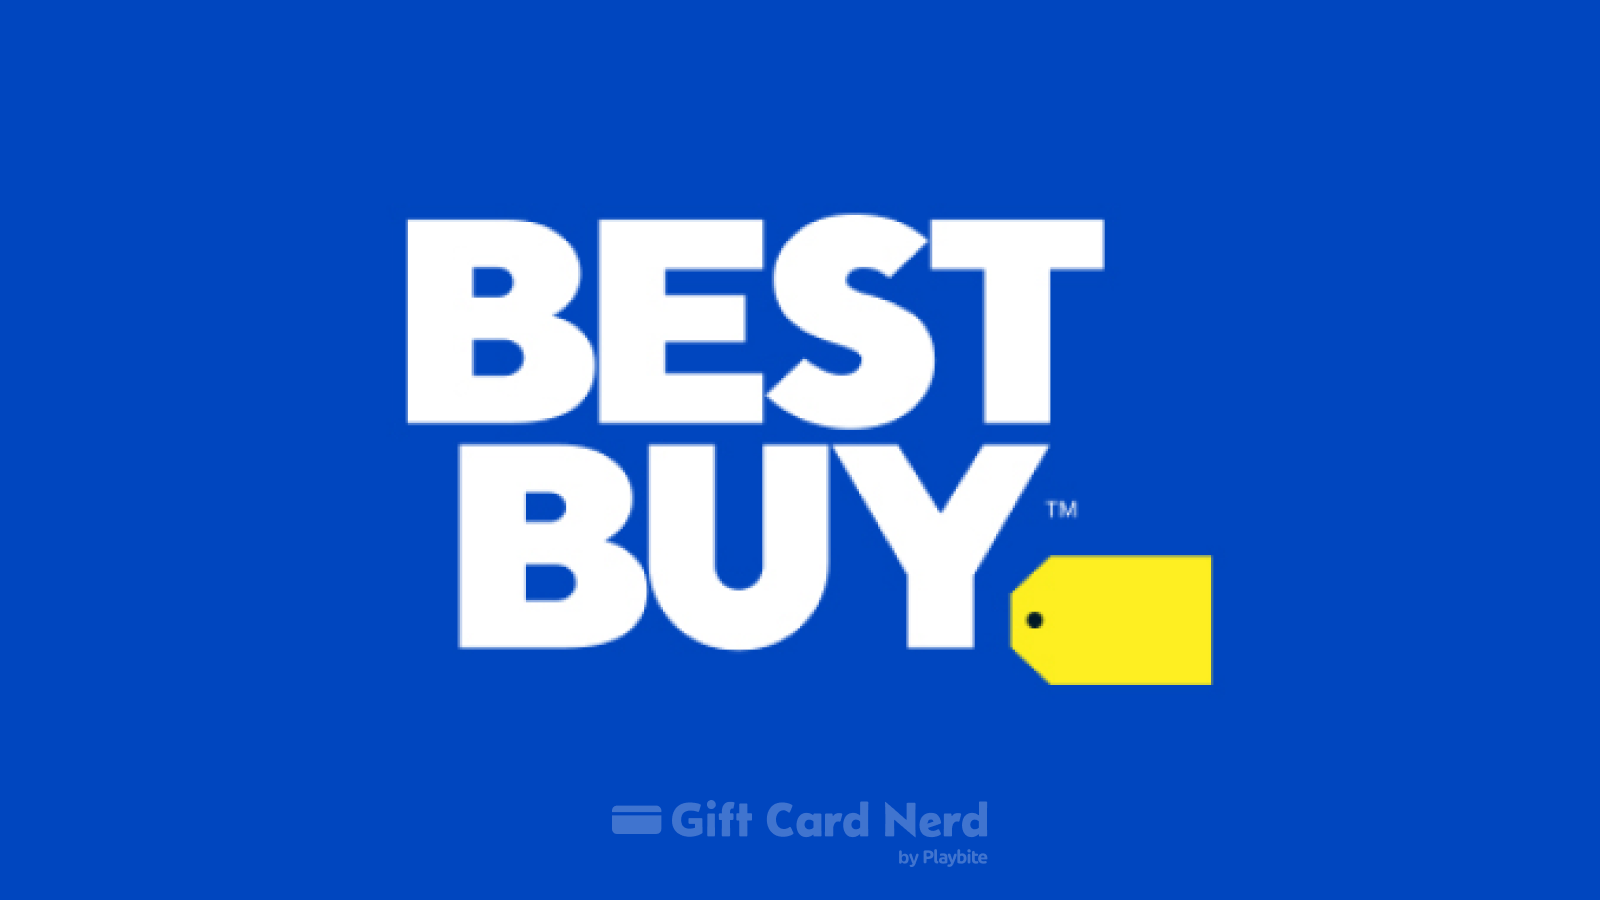 Can you buy Best Buy gift cards at Walmart?